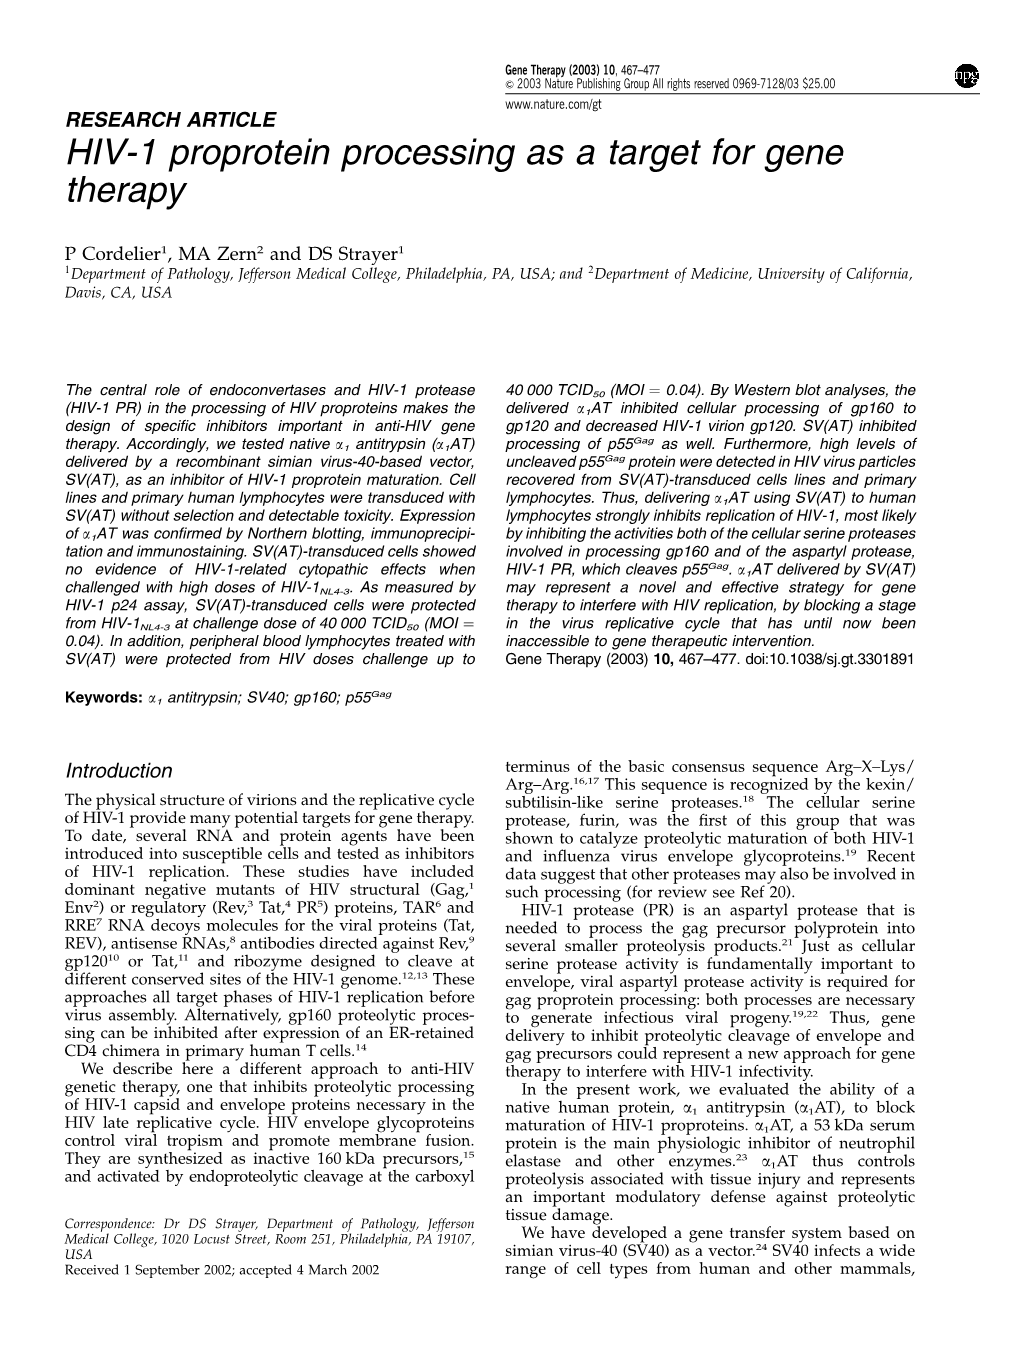 HIV-1 Proprotein Processing As a Target for Gene Therapy